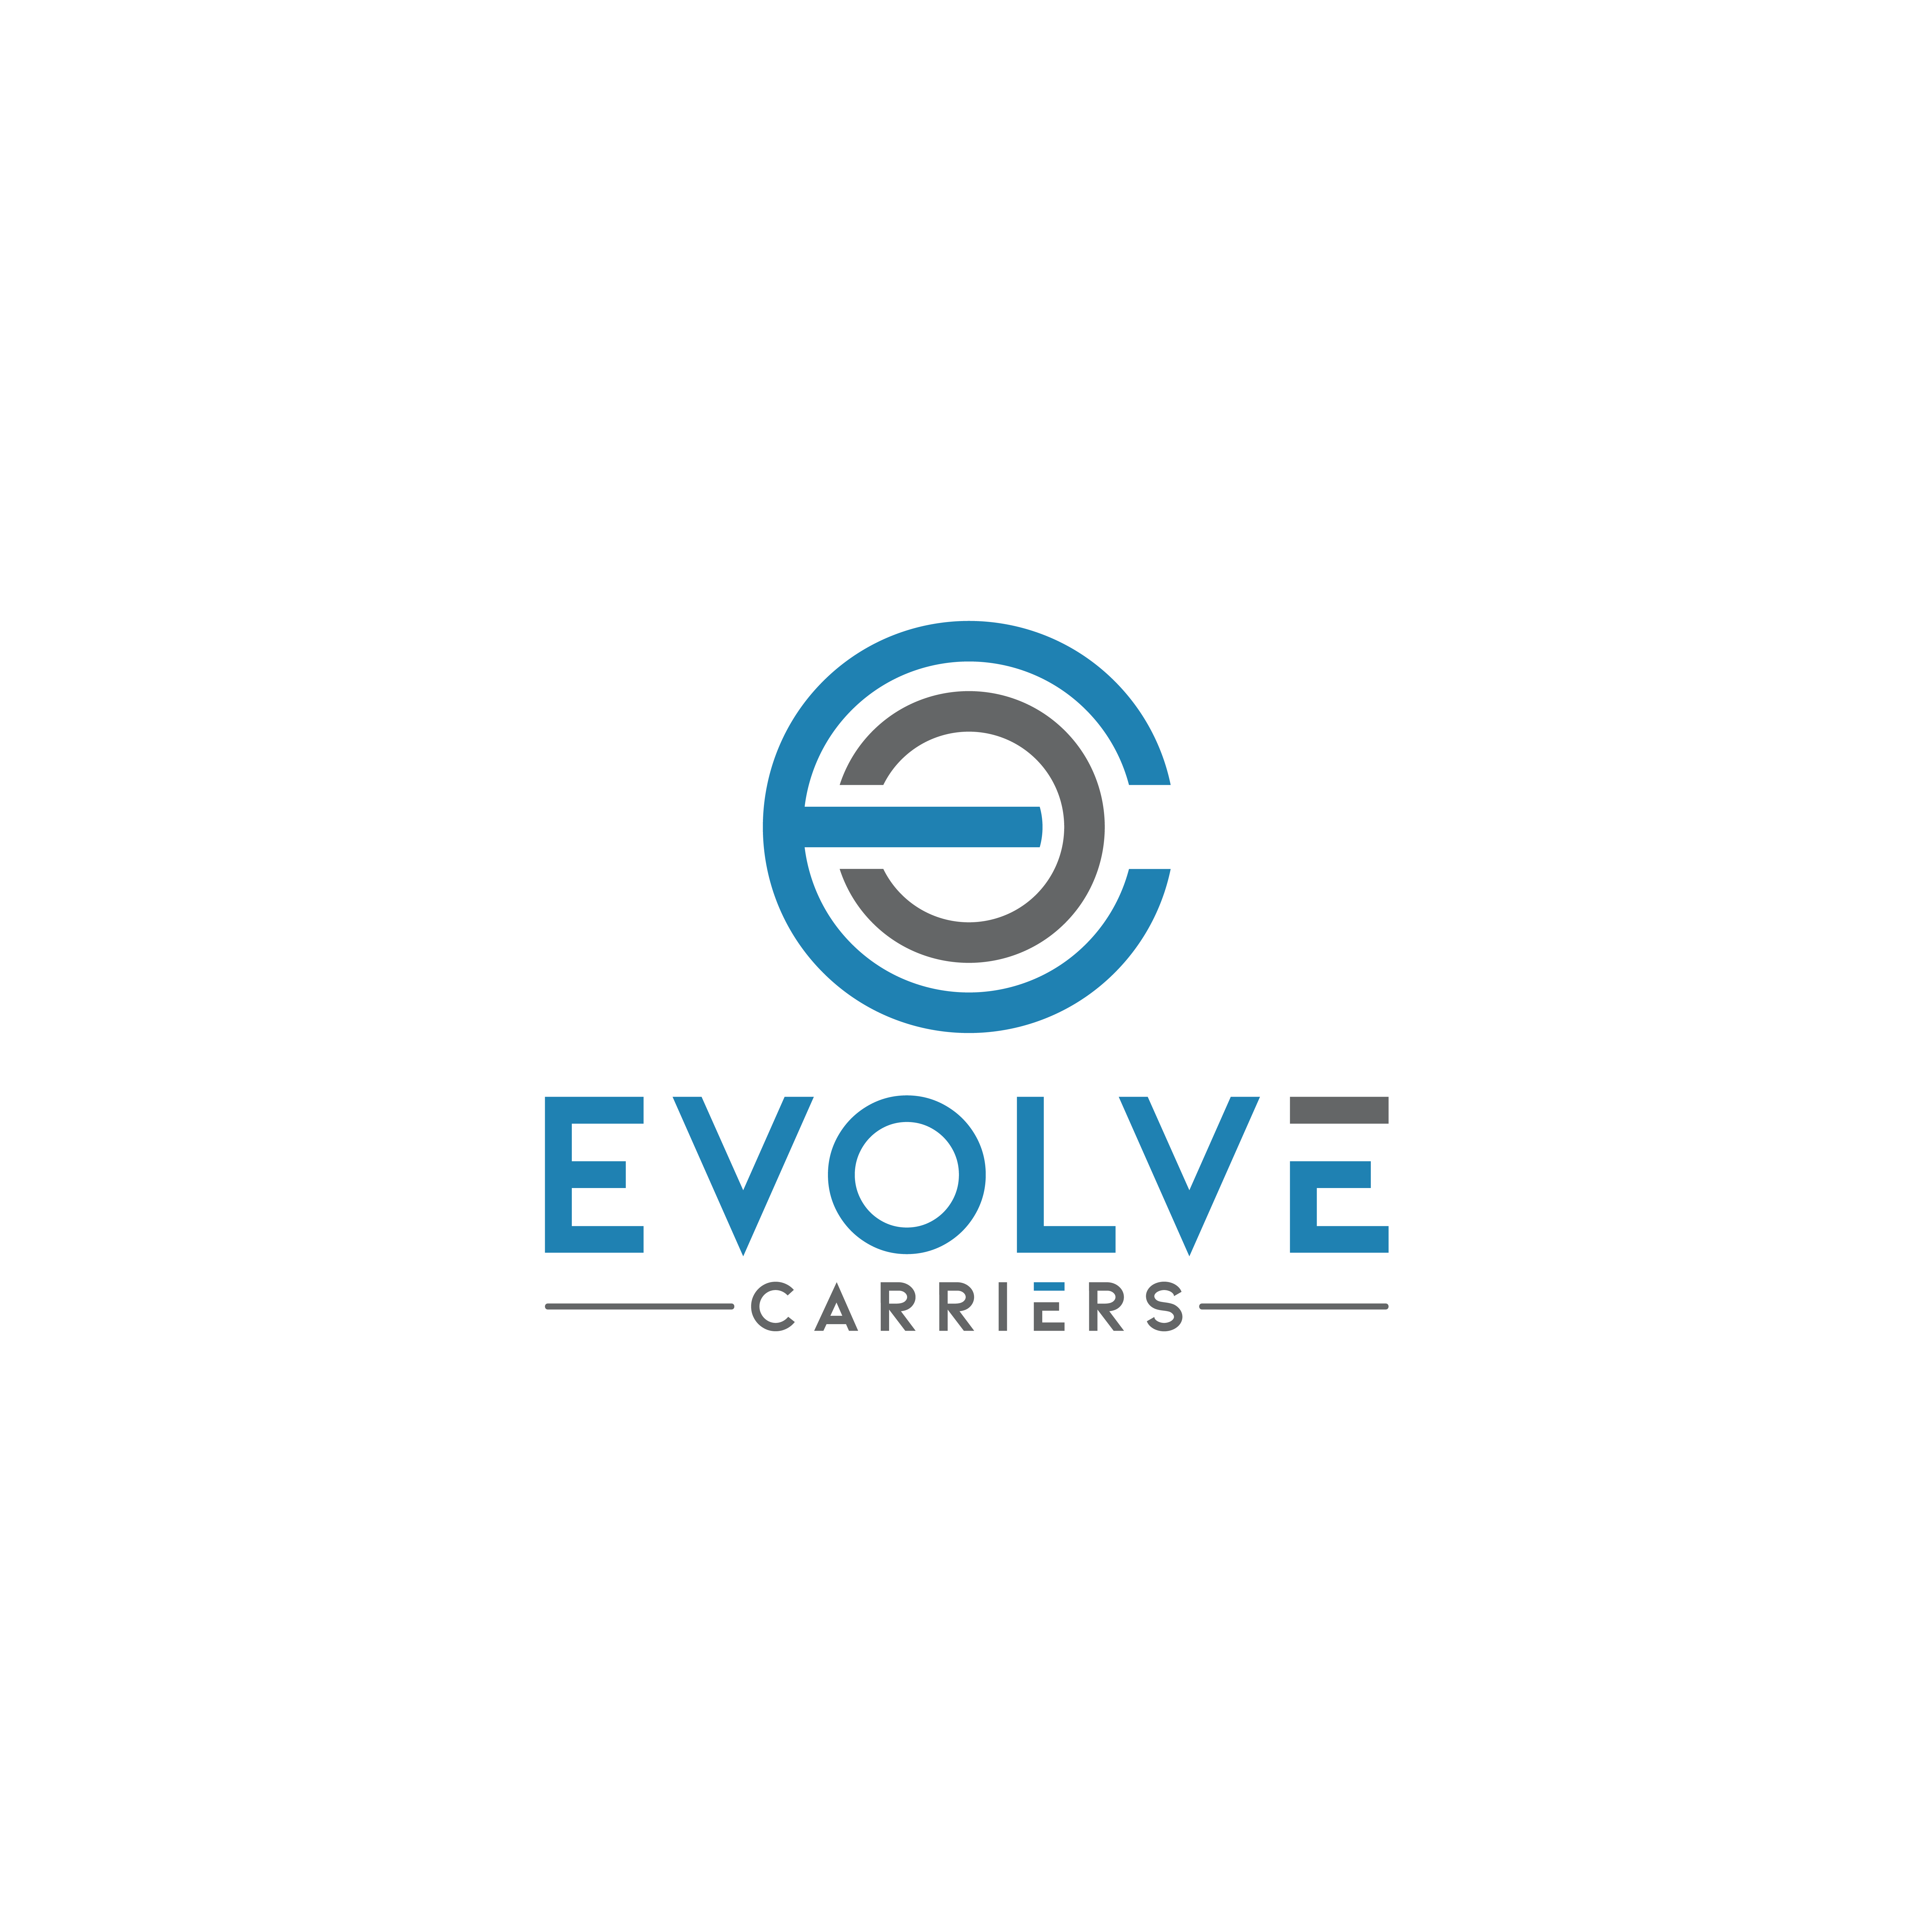 Evolve Carriers Logo